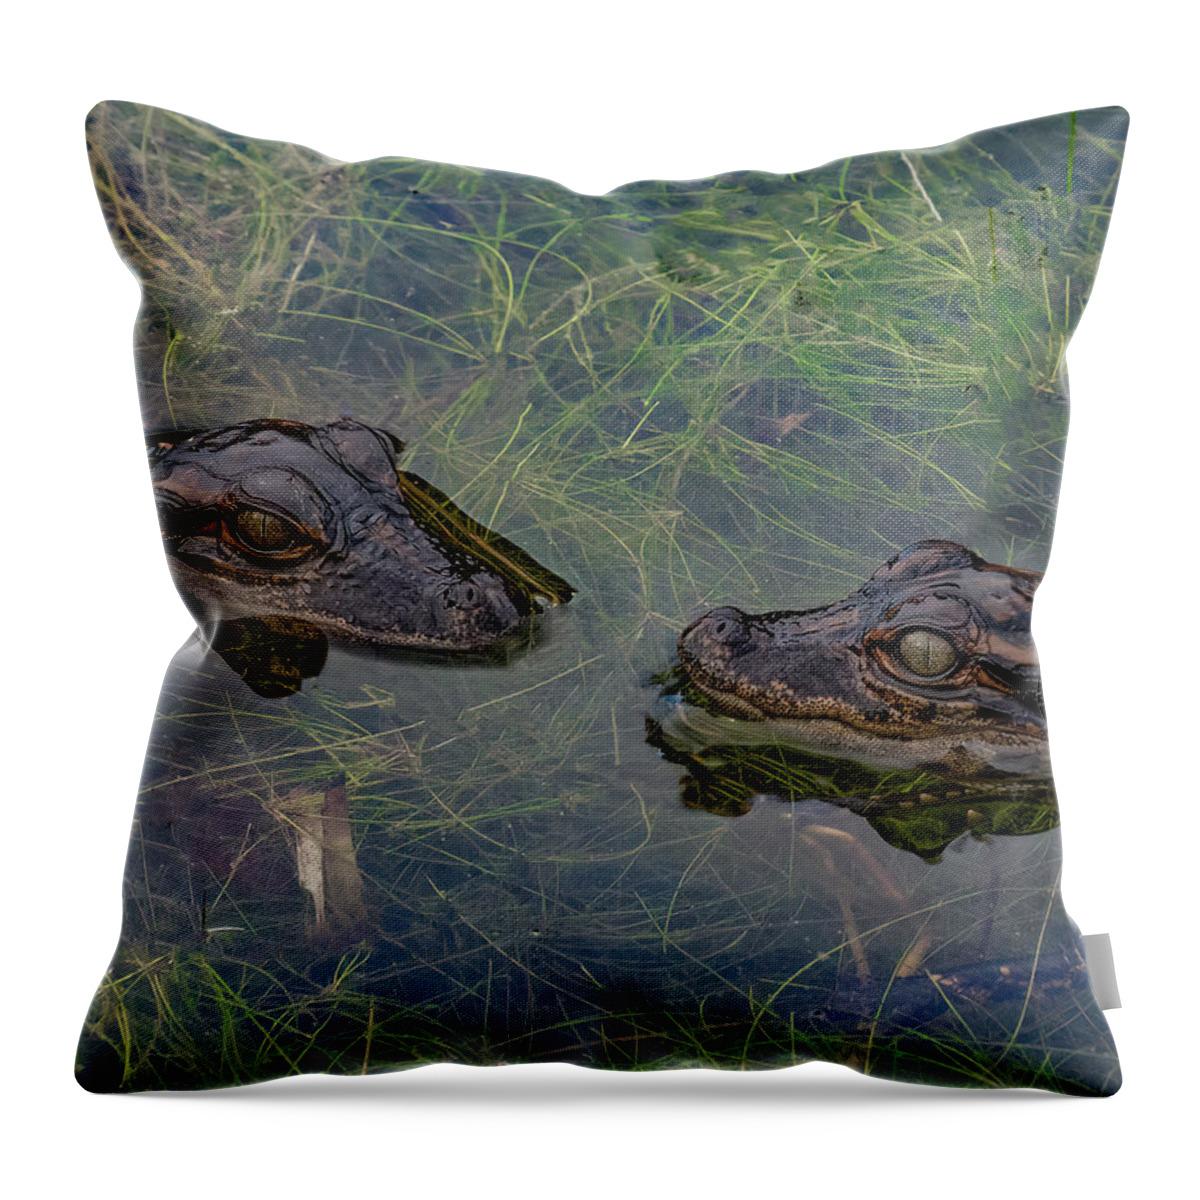 Aligator Throw Pillow featuring the photograph Baby Aligatots by Larry Marshall